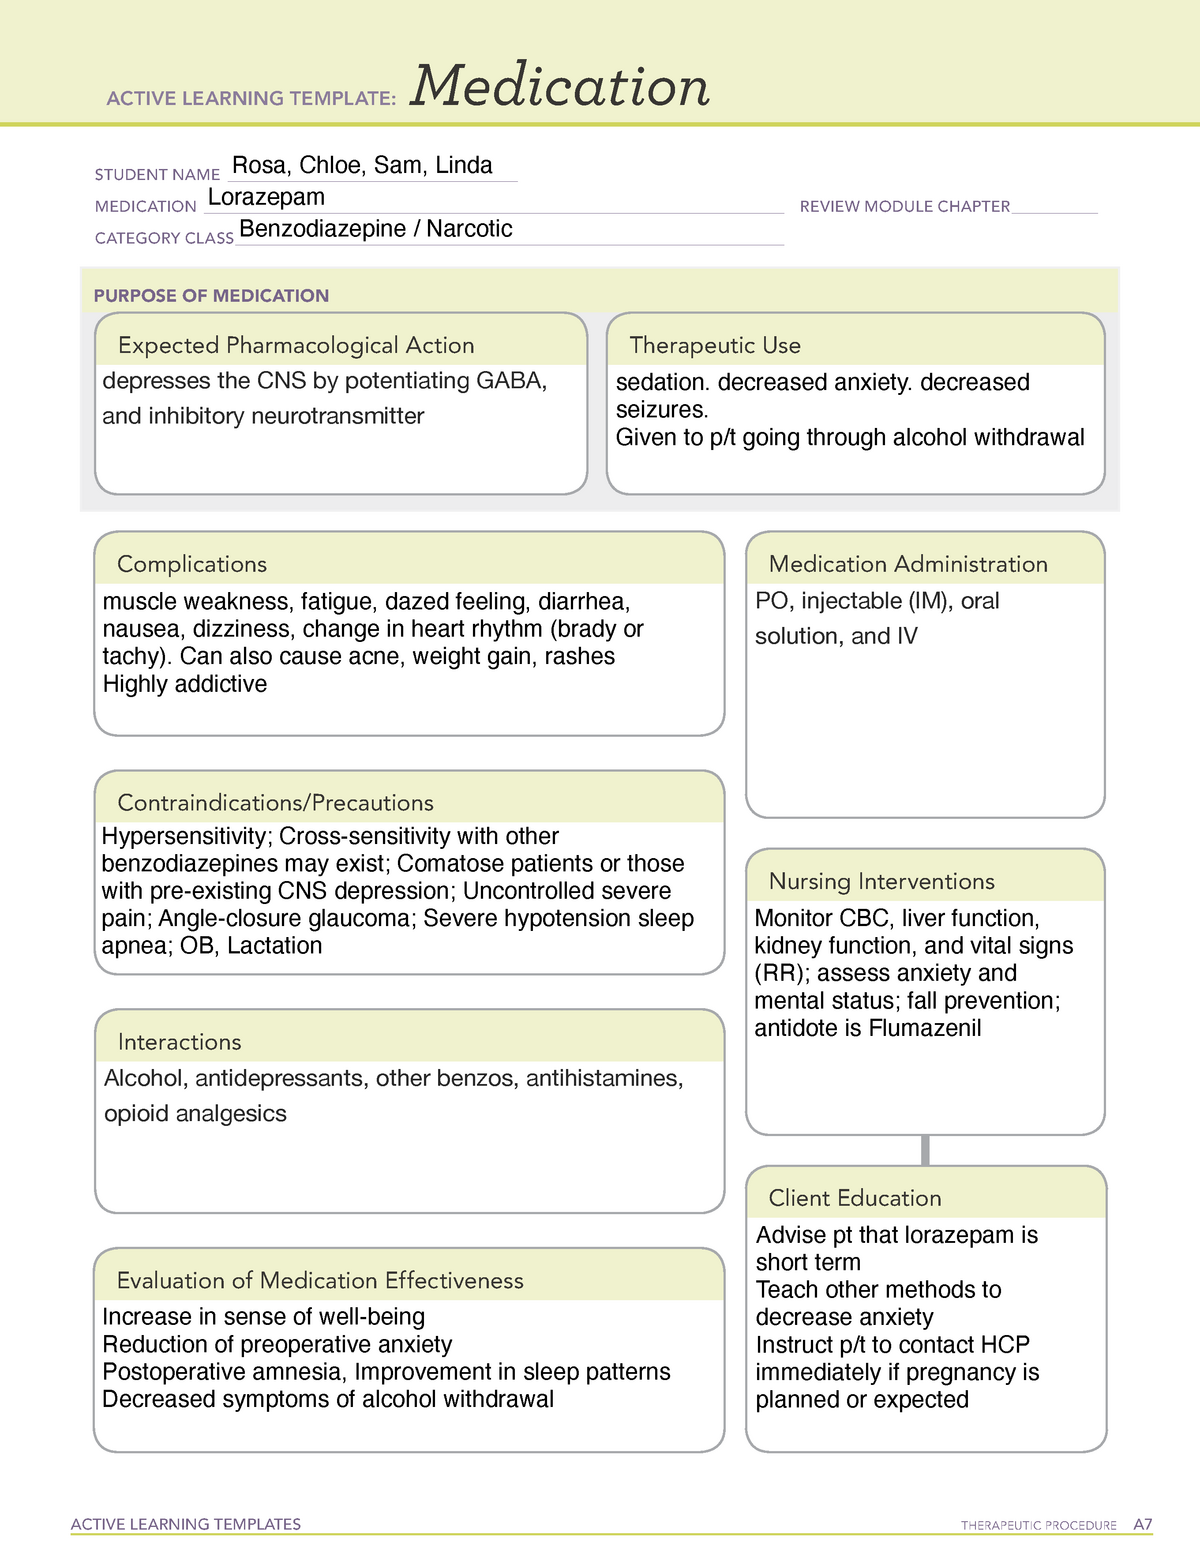 Lorazepam Active Learning Template